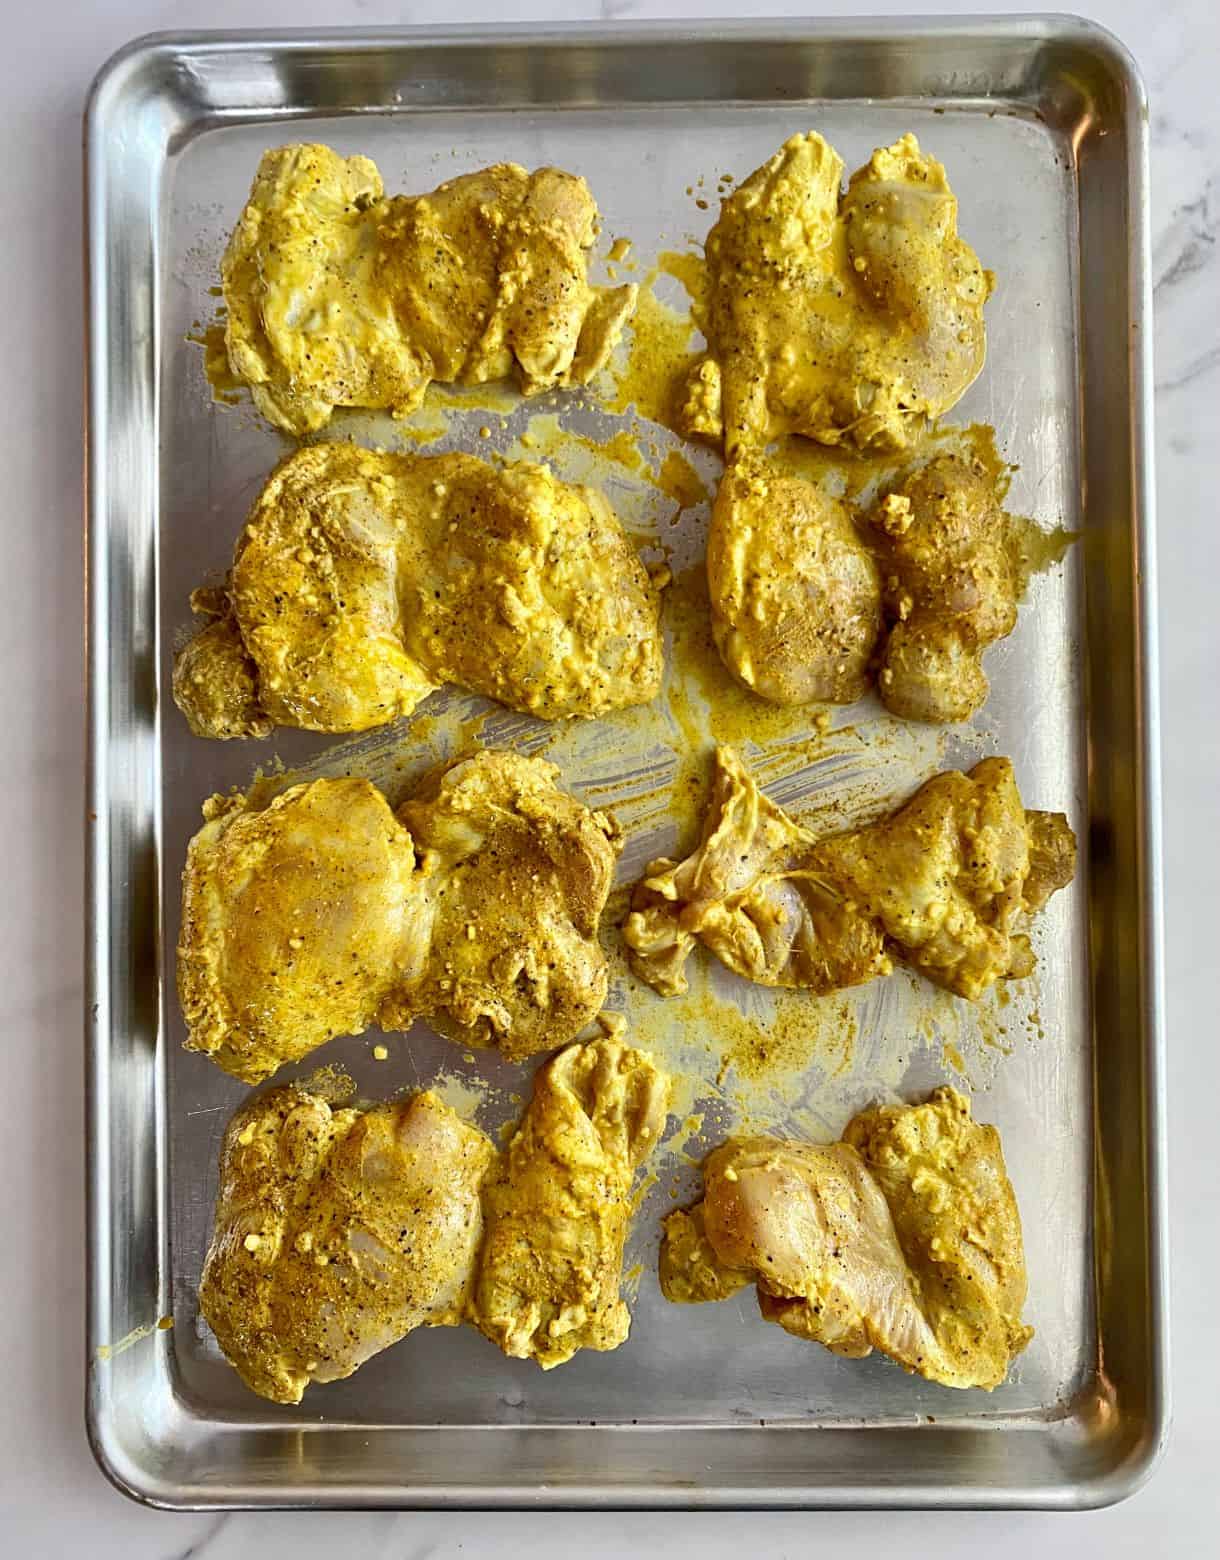 A sheet pan with raw marinated chicken thighs.